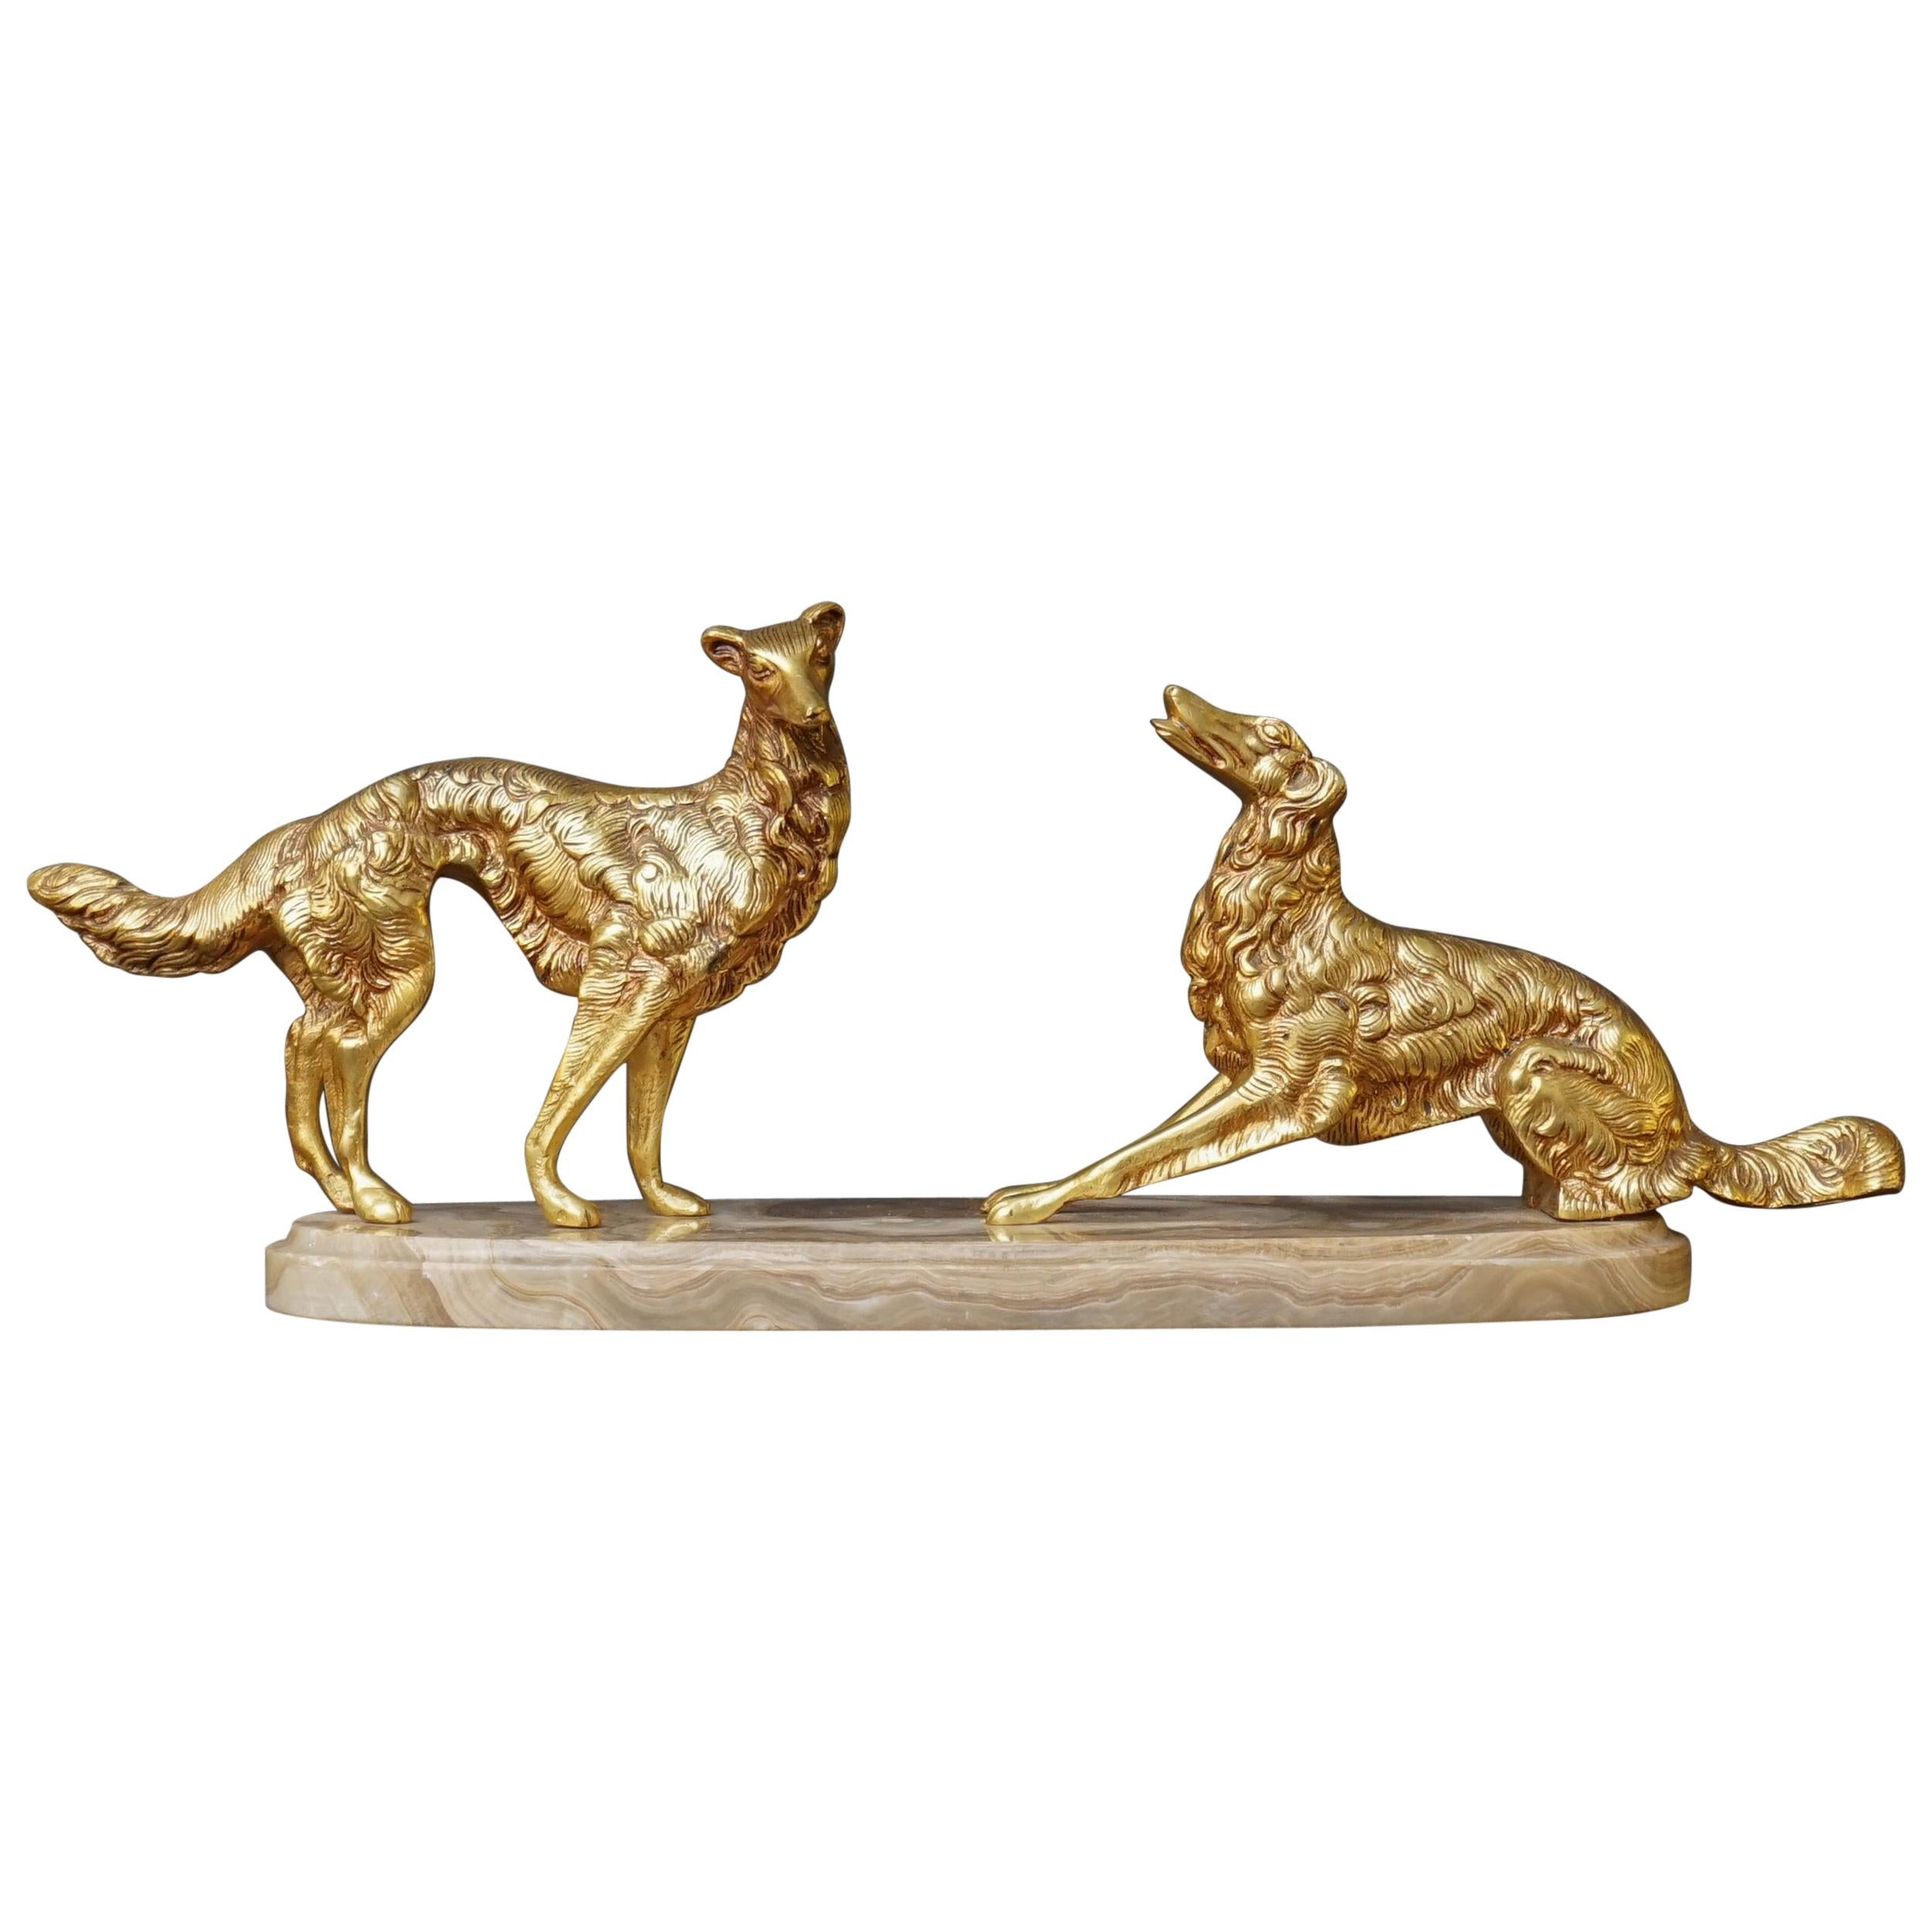 19th C. Art Deco French Brass Borzoi or Barzoi Dogs on 'Cafe au Lait' Marble